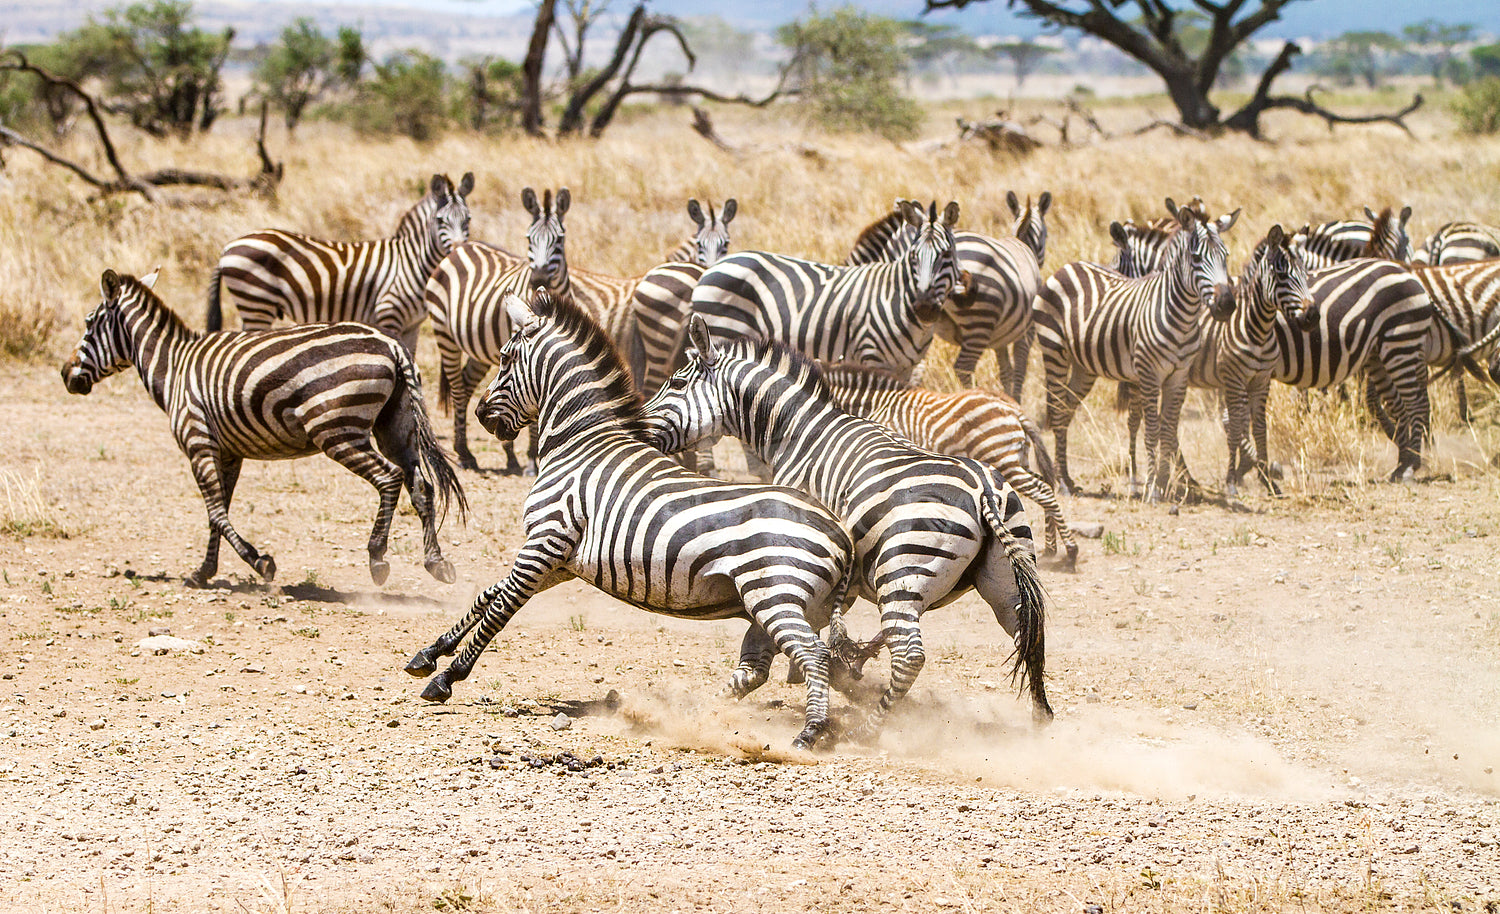 Two zebras fighting at the plains of Serengeti